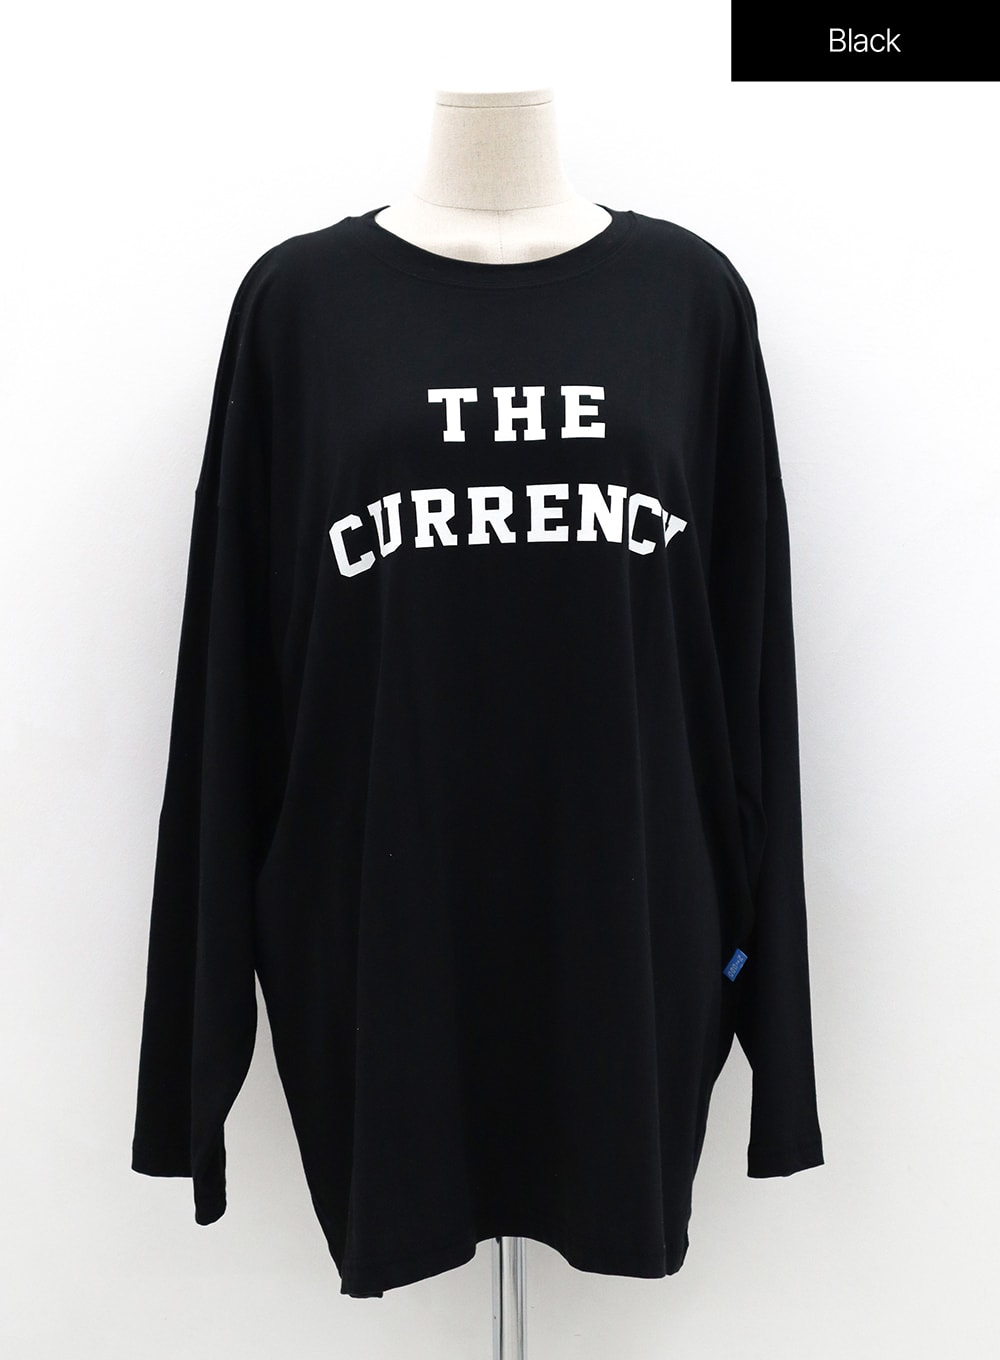 Plus Casual Round Cotton Long Sleeve T-Shirt IS02